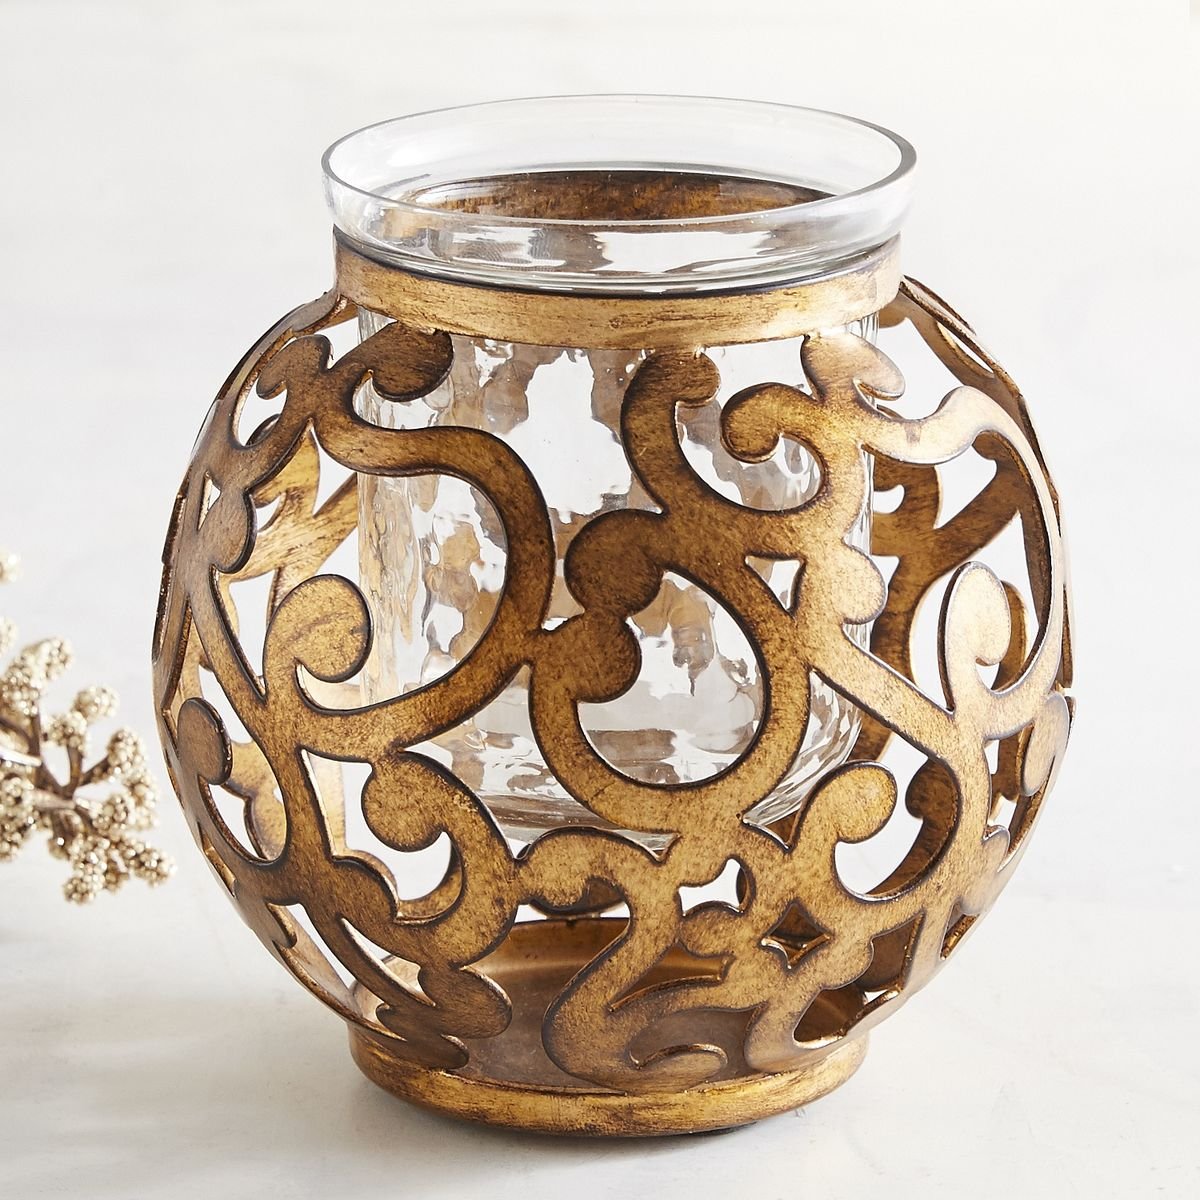 Candelero Gold Scroll Pier 1 Imports